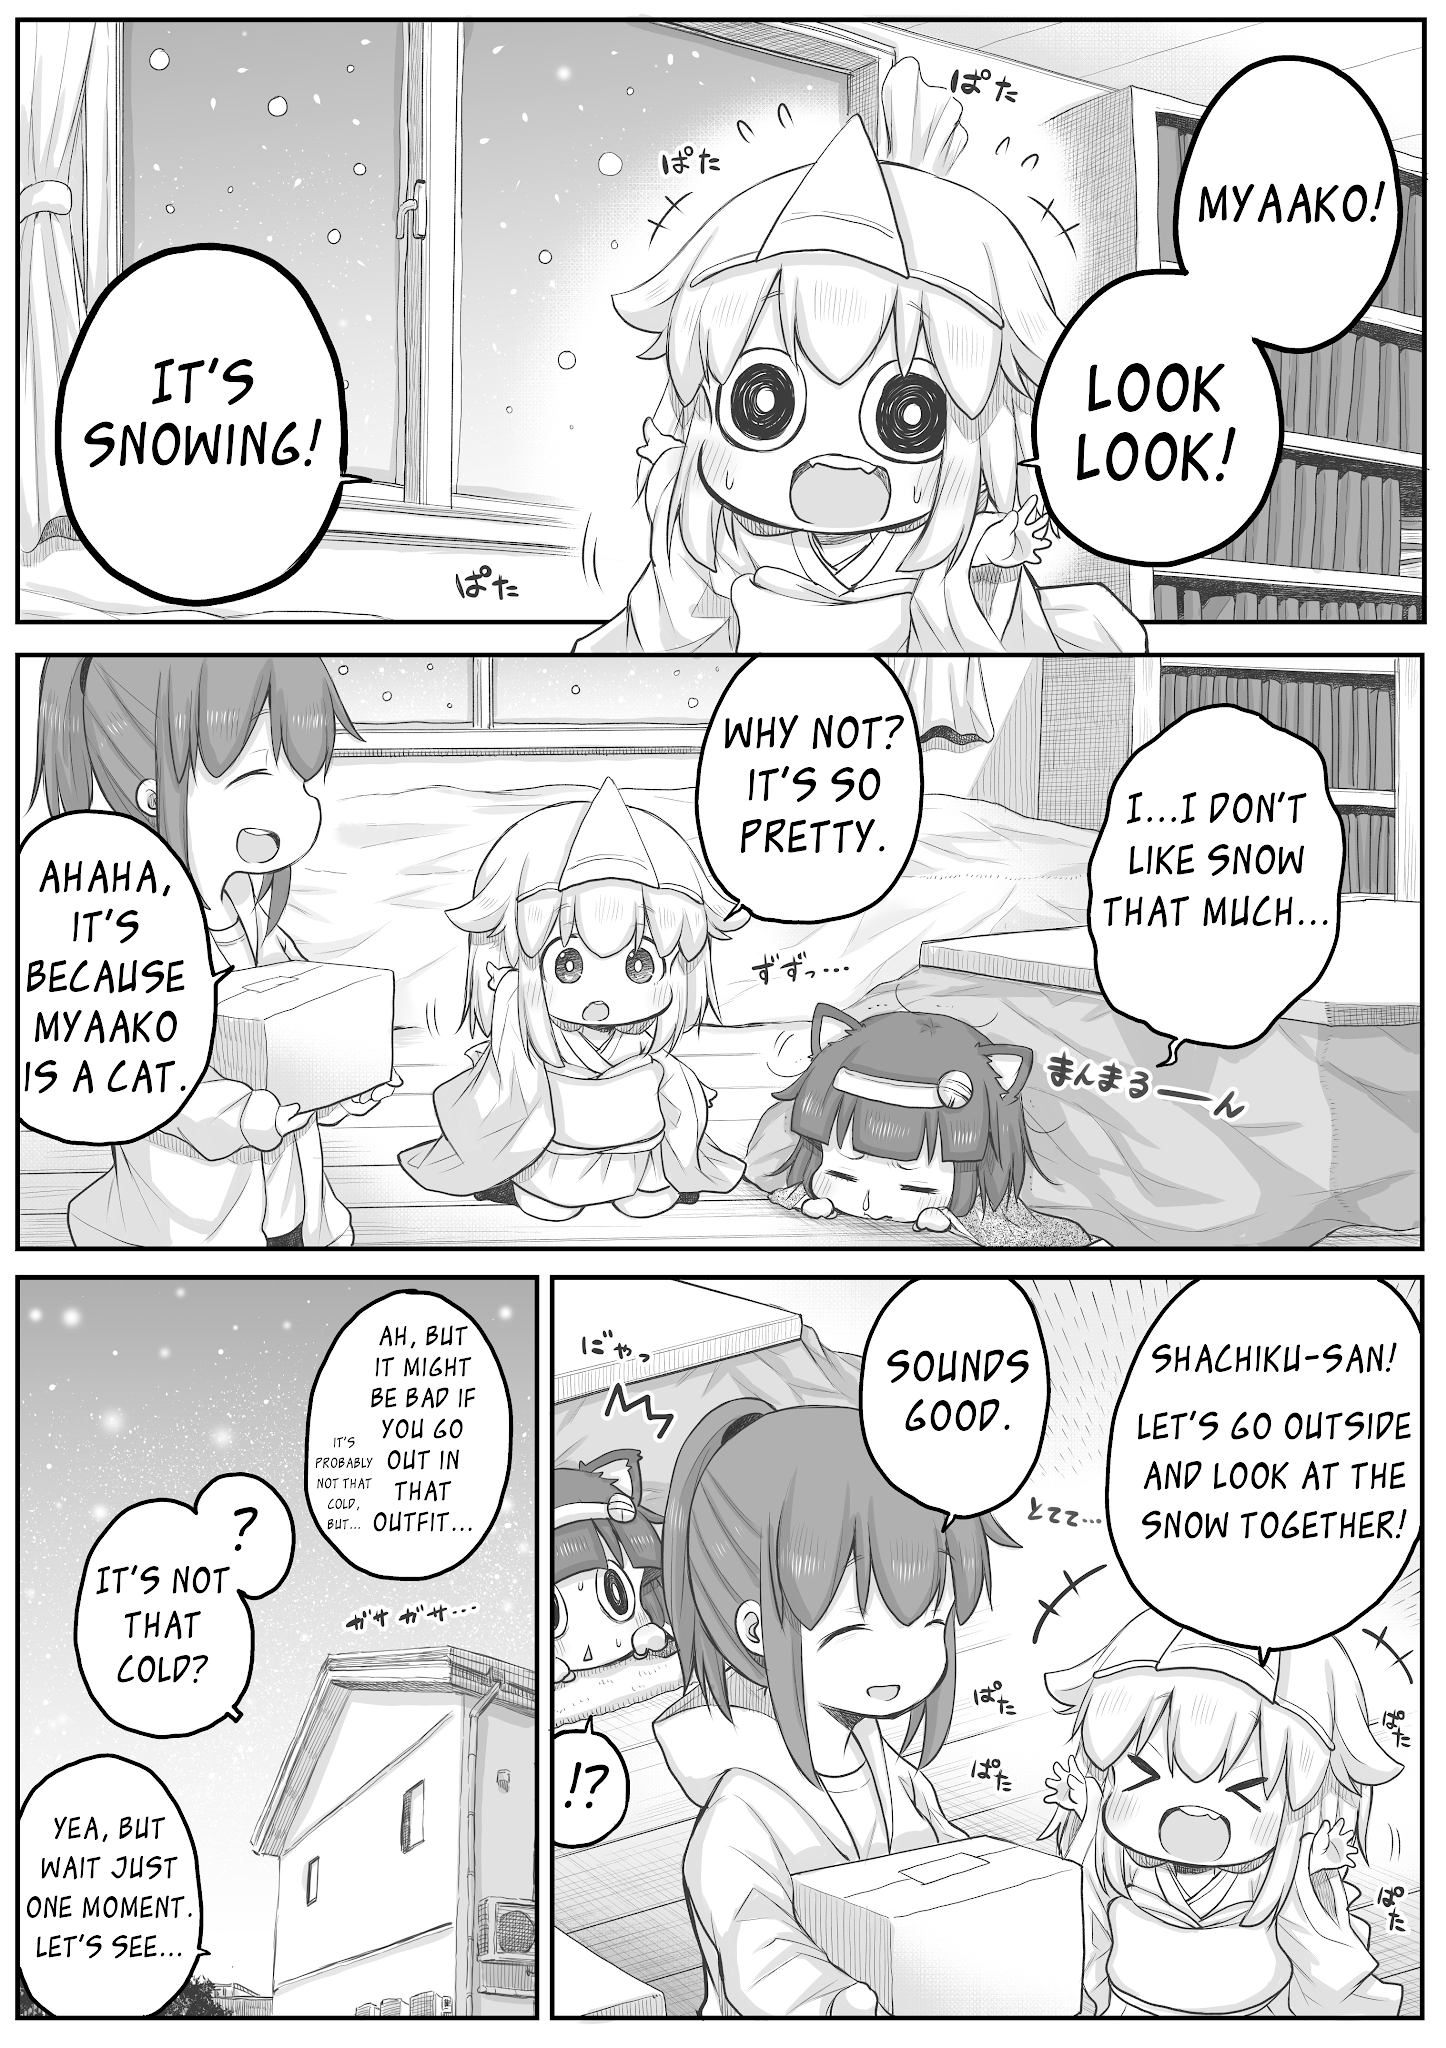 Ms. Corporate Slave Wants To Be Healed By A Loli Spirit - Page 1